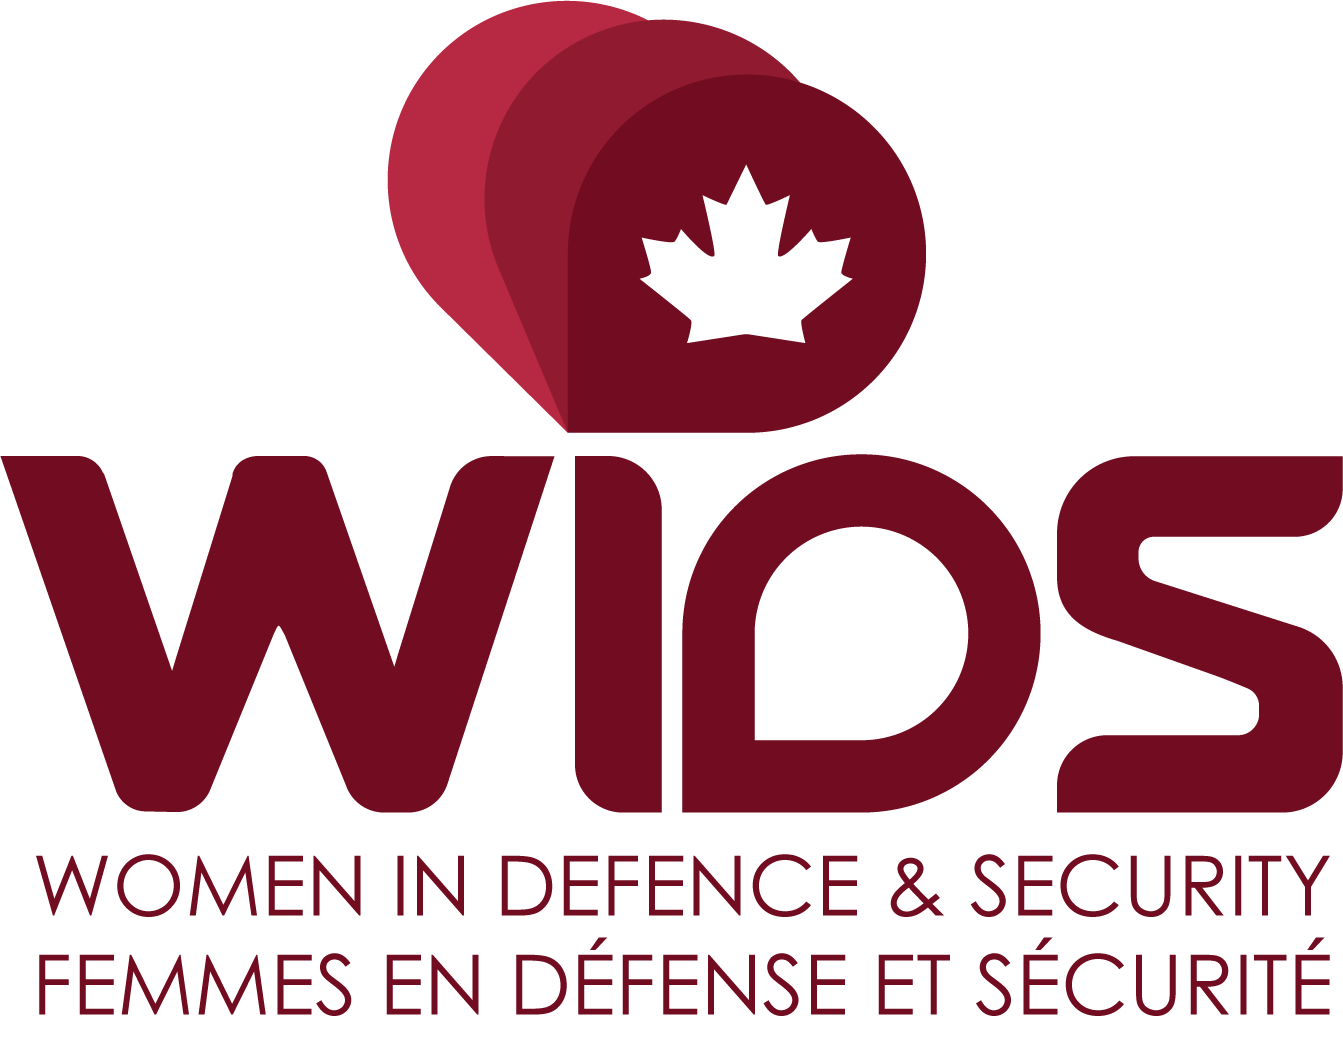 Women in Defence and Security logo